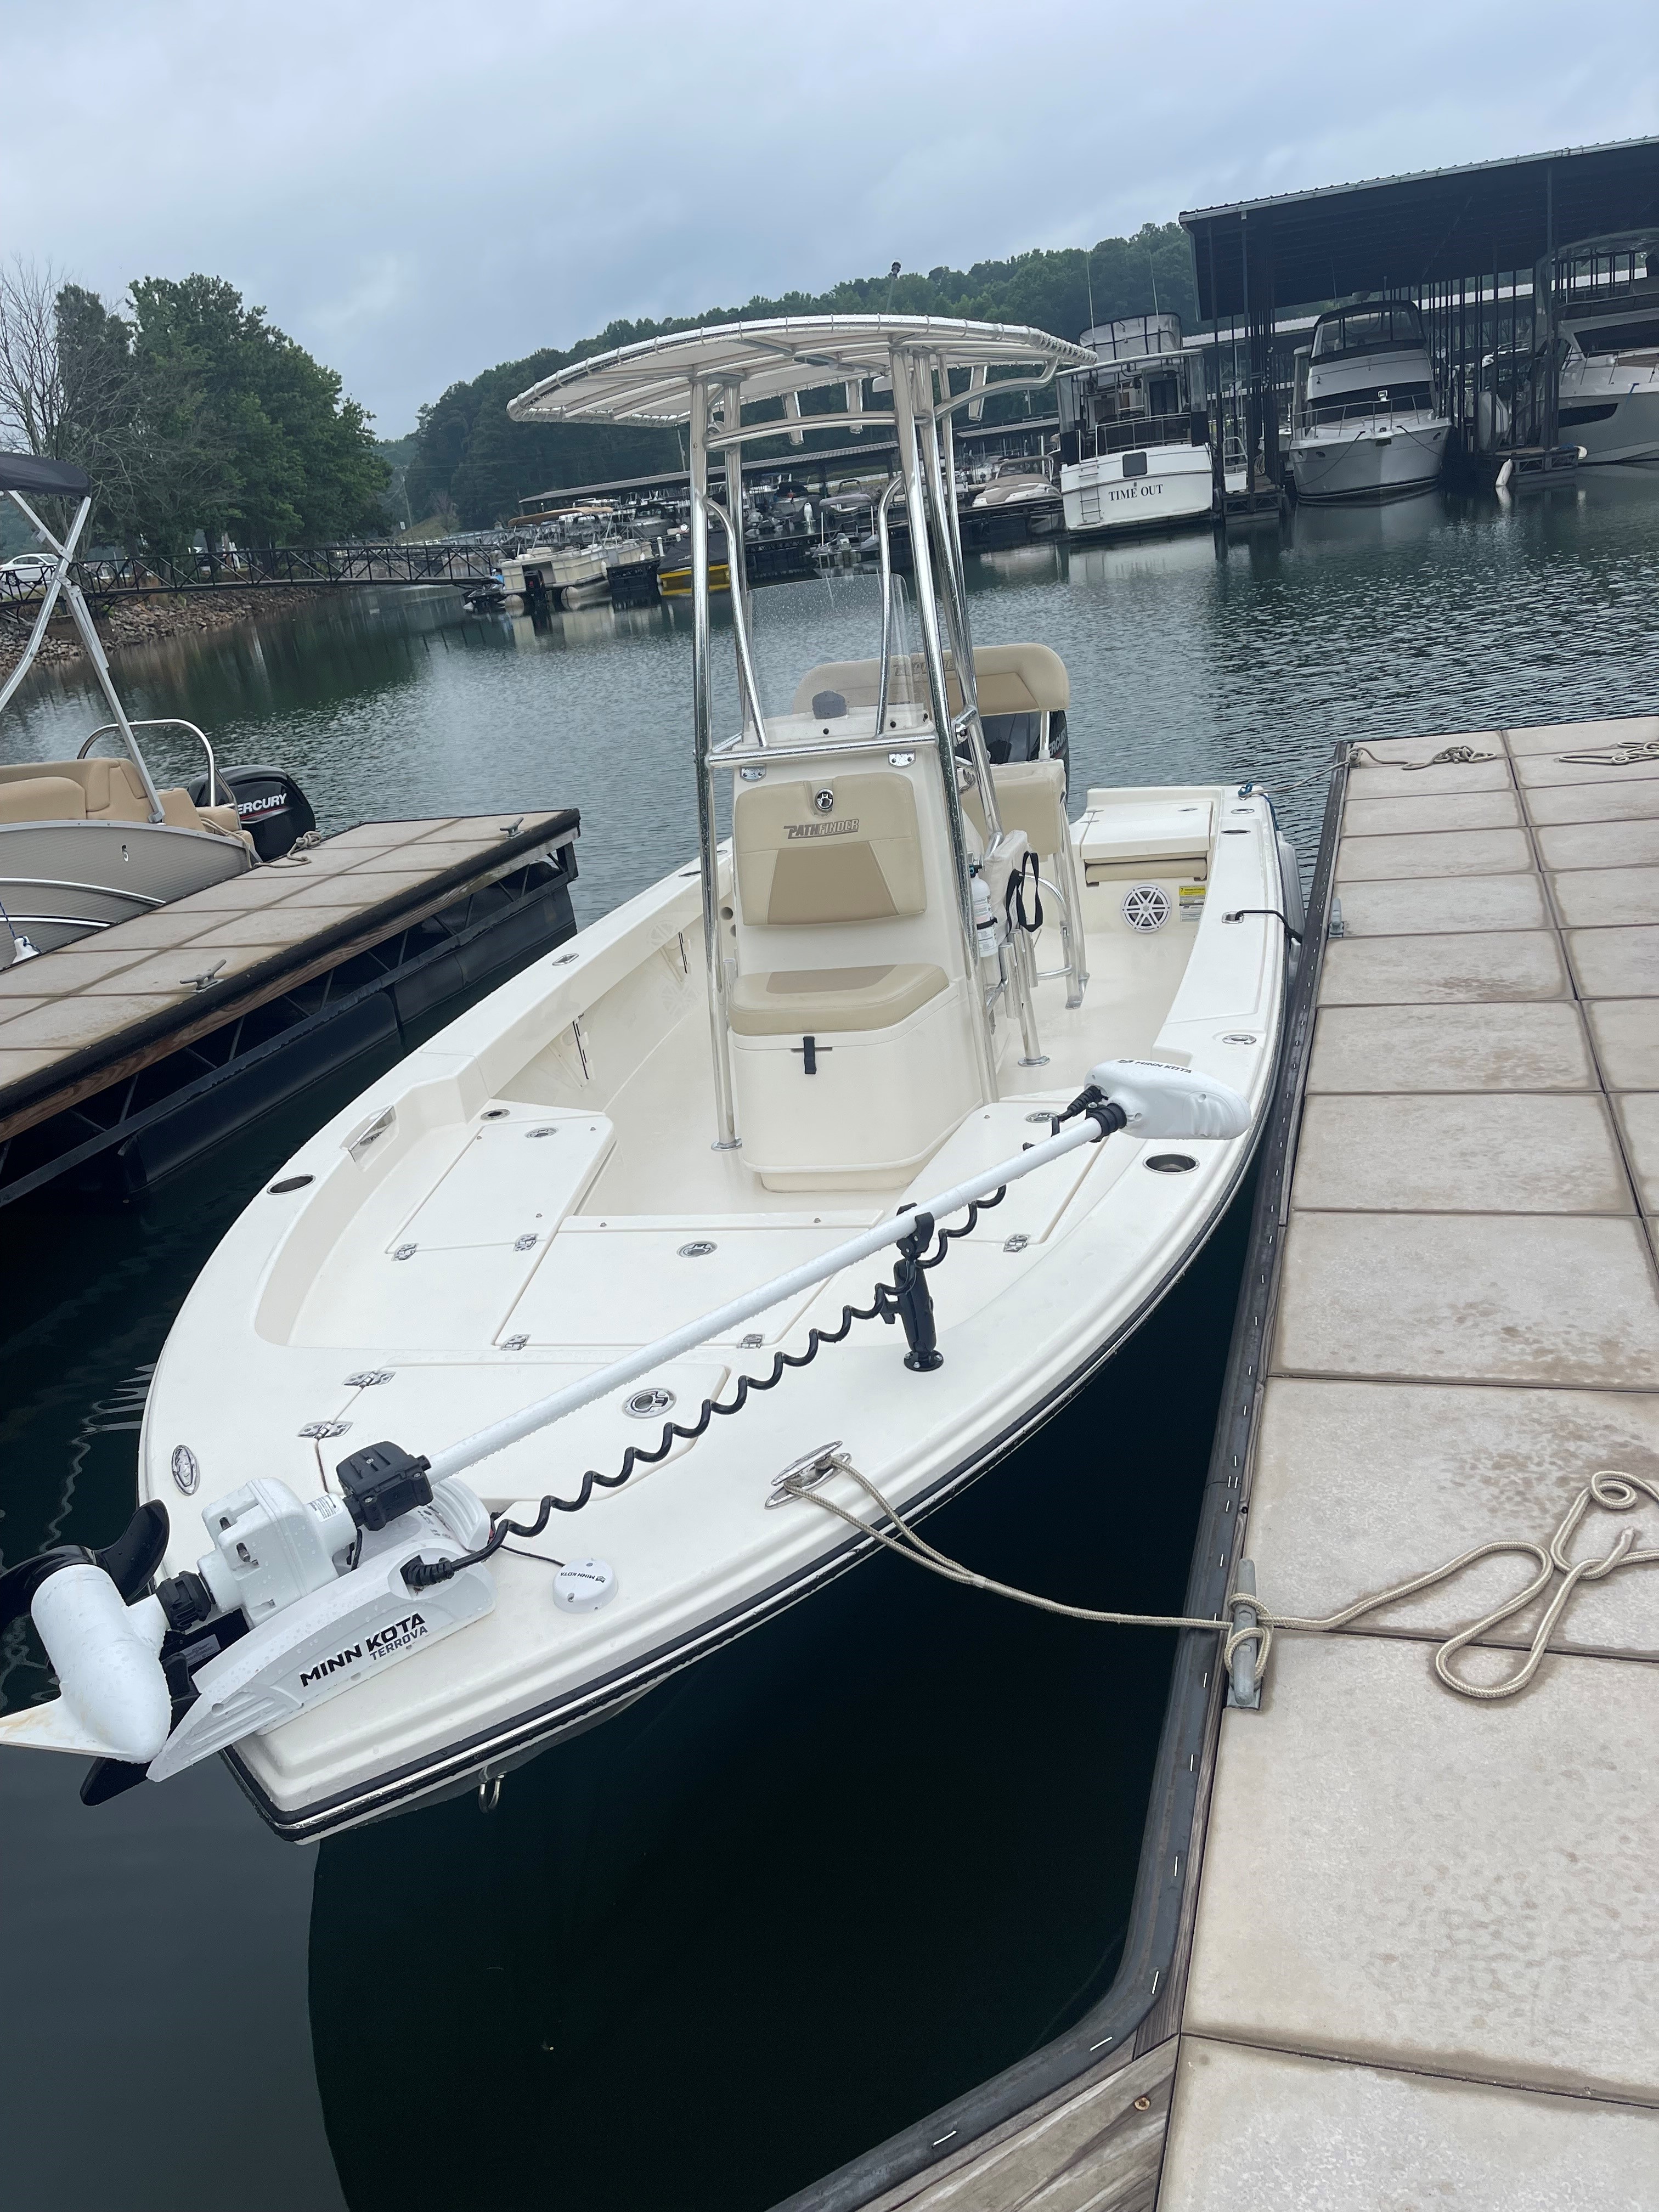 AT LAST (20' Pathfinder Center Console Fishing boat-150HP- Fishing)